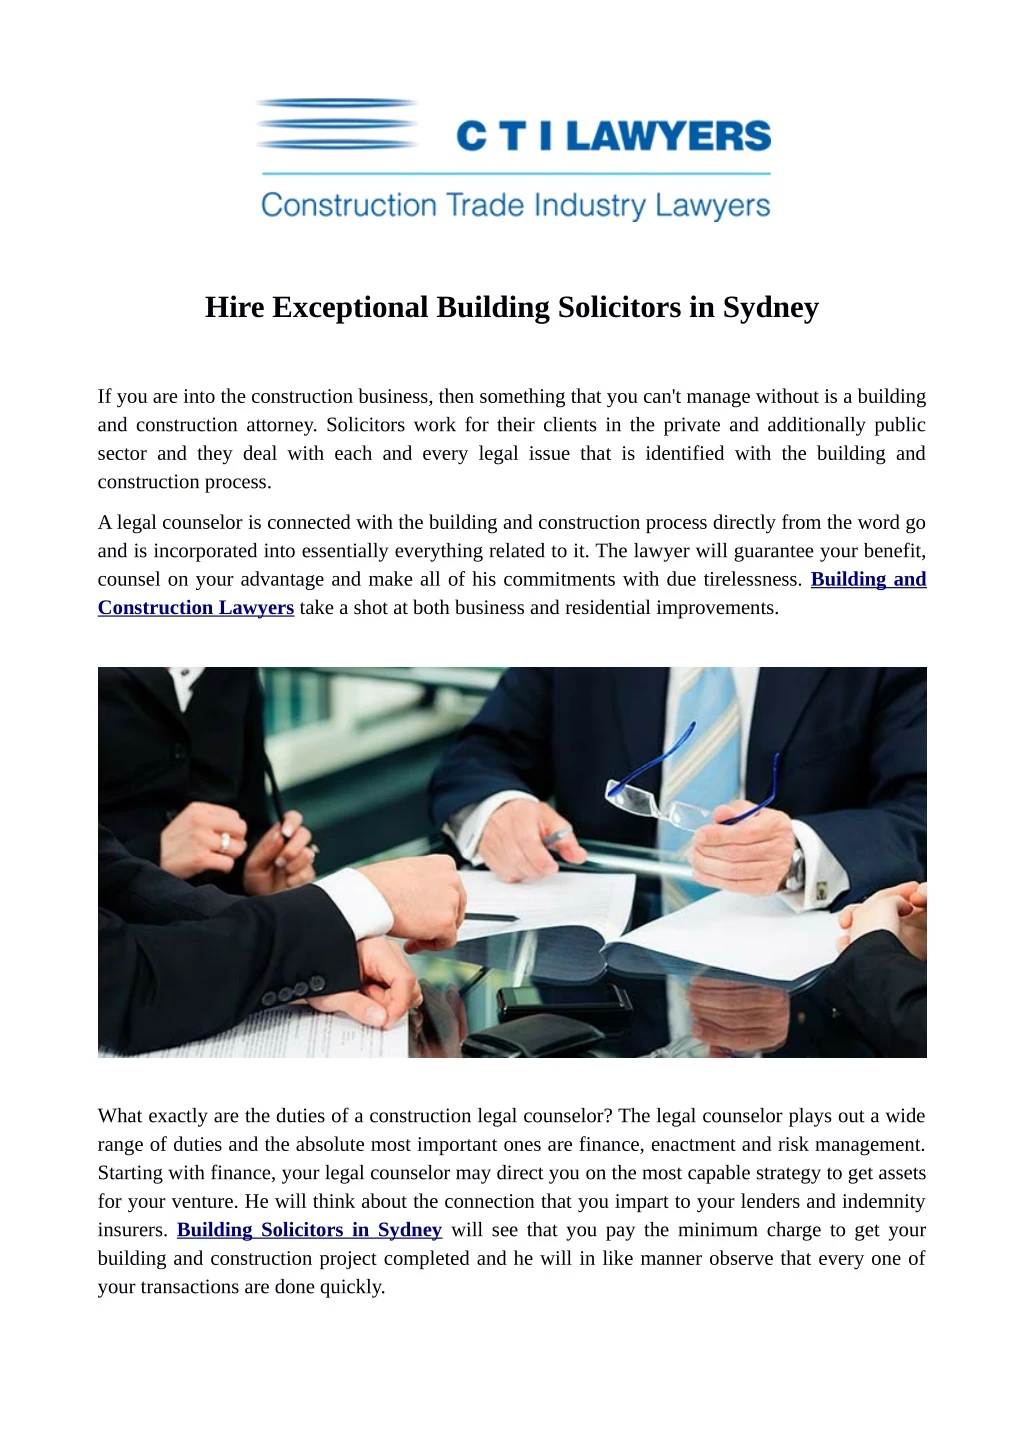 hire exceptional building solicitors in sydney